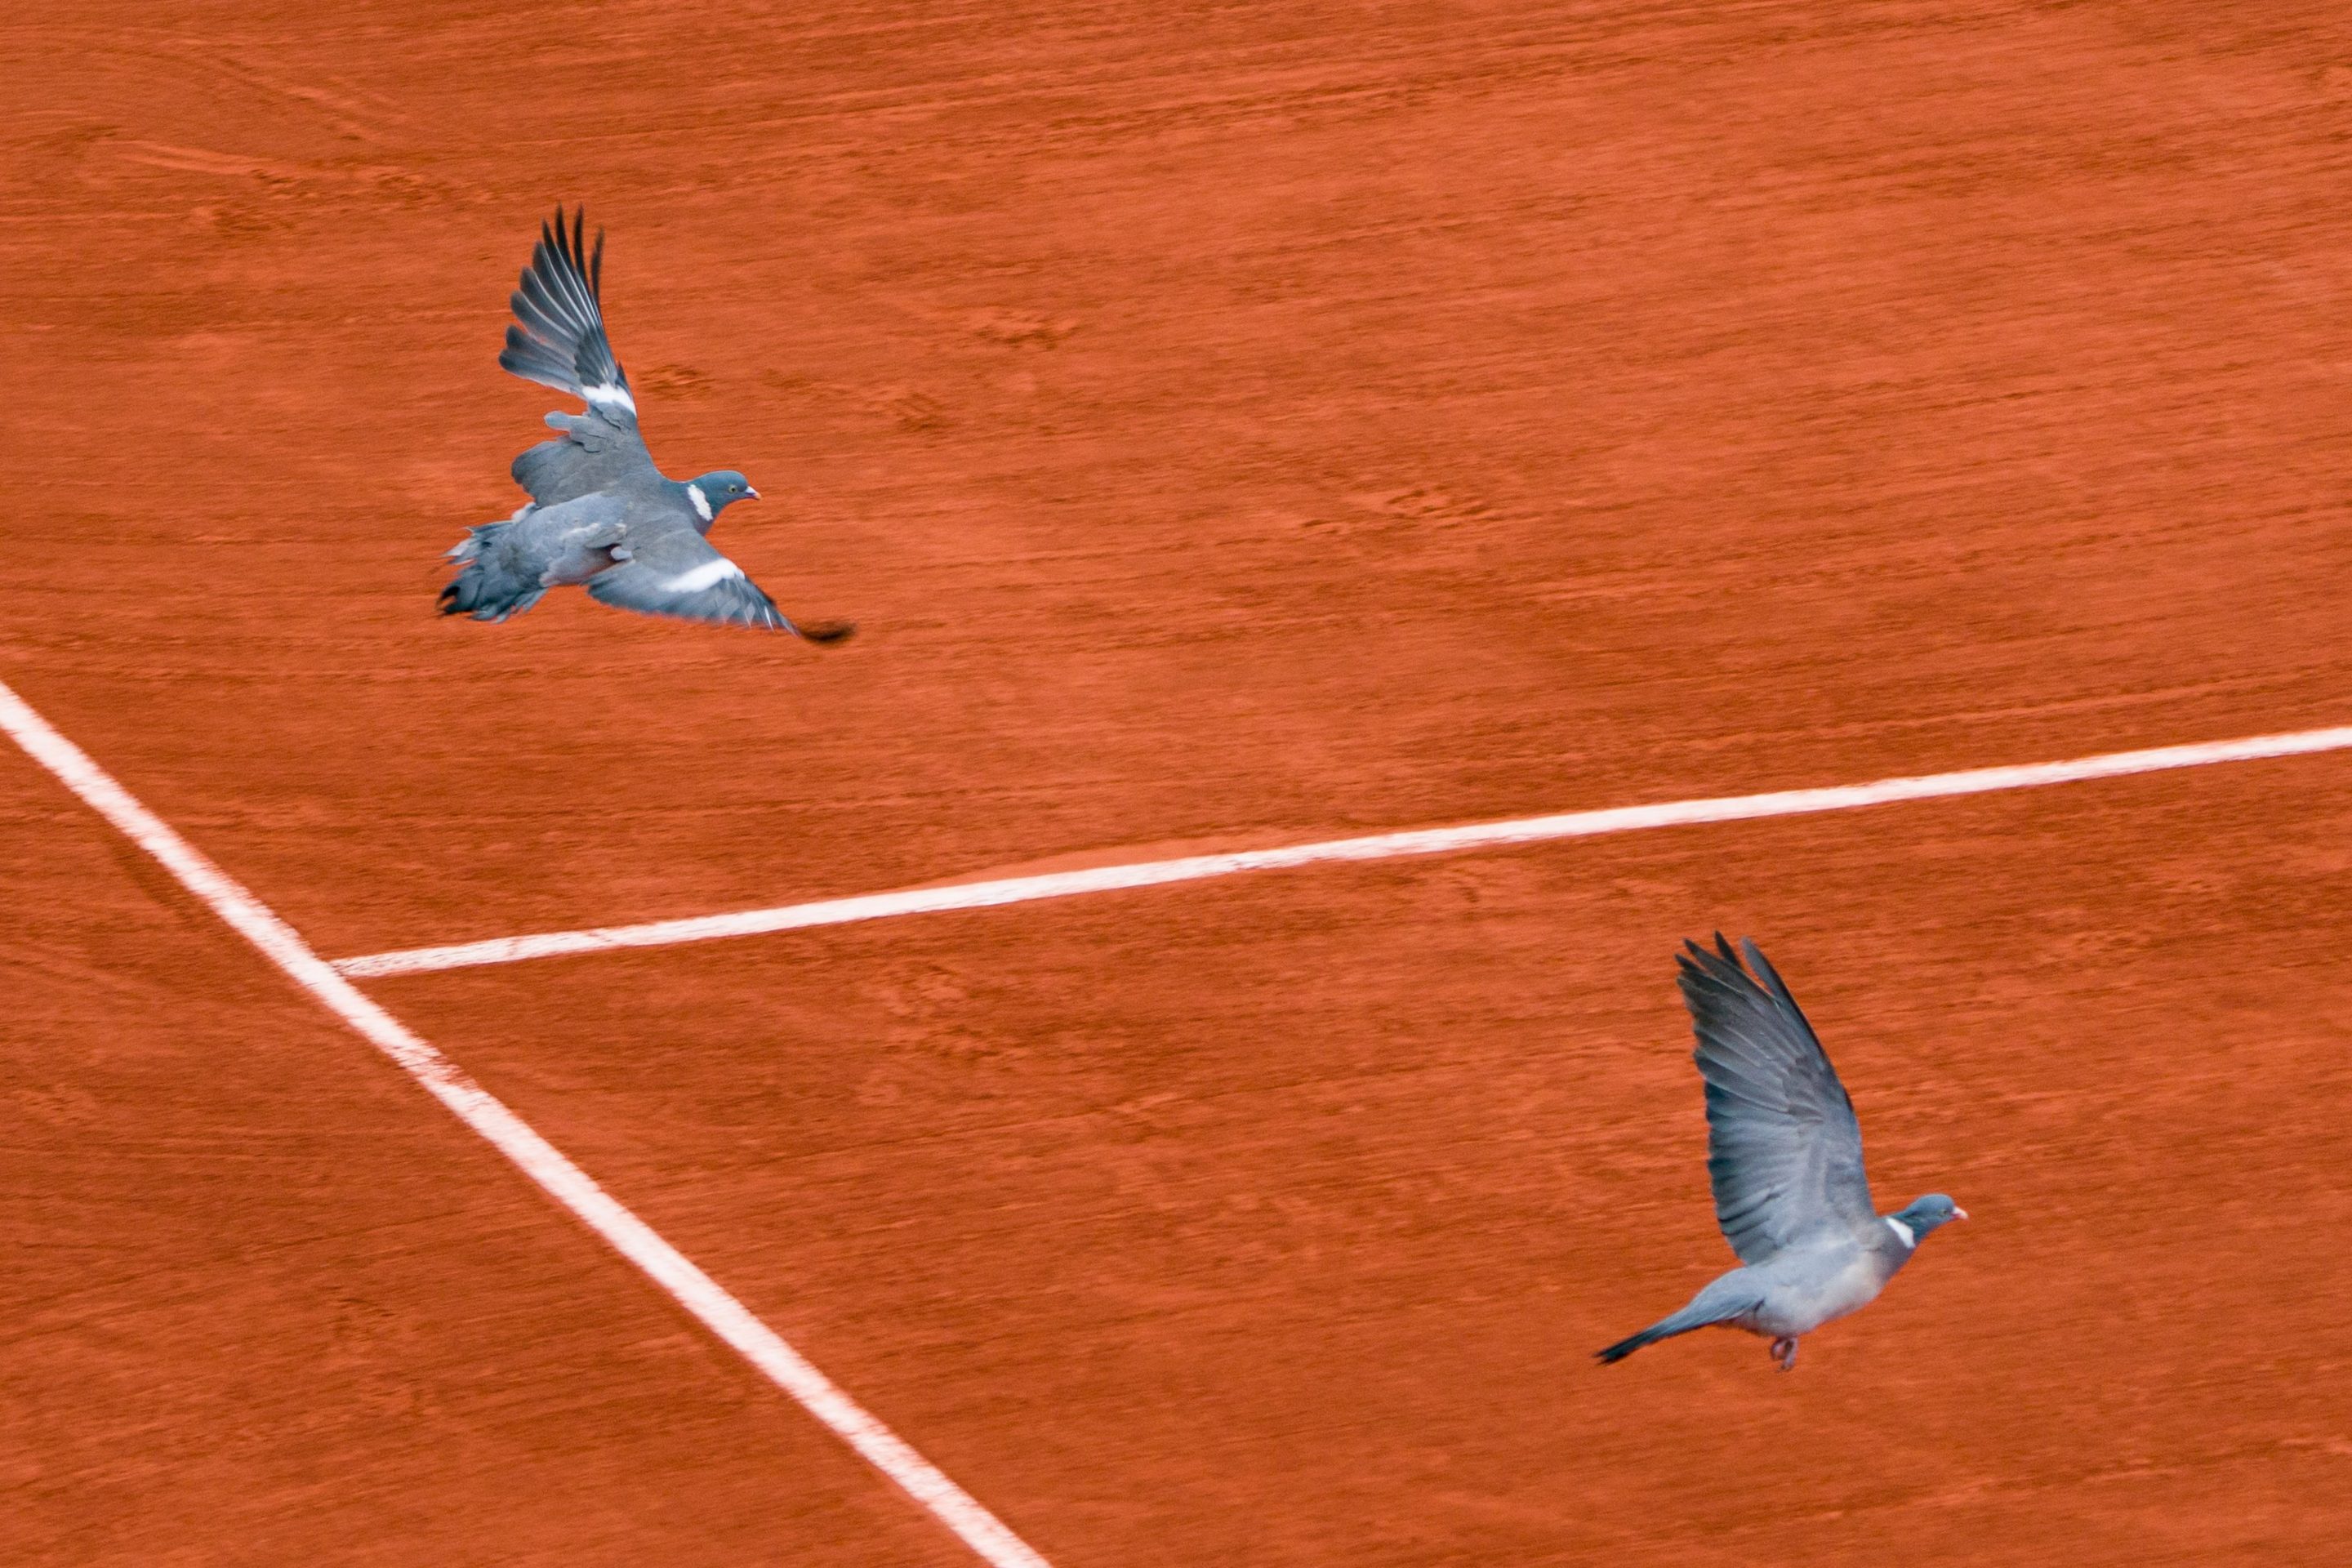 Pigeons disrupt play at the French Open